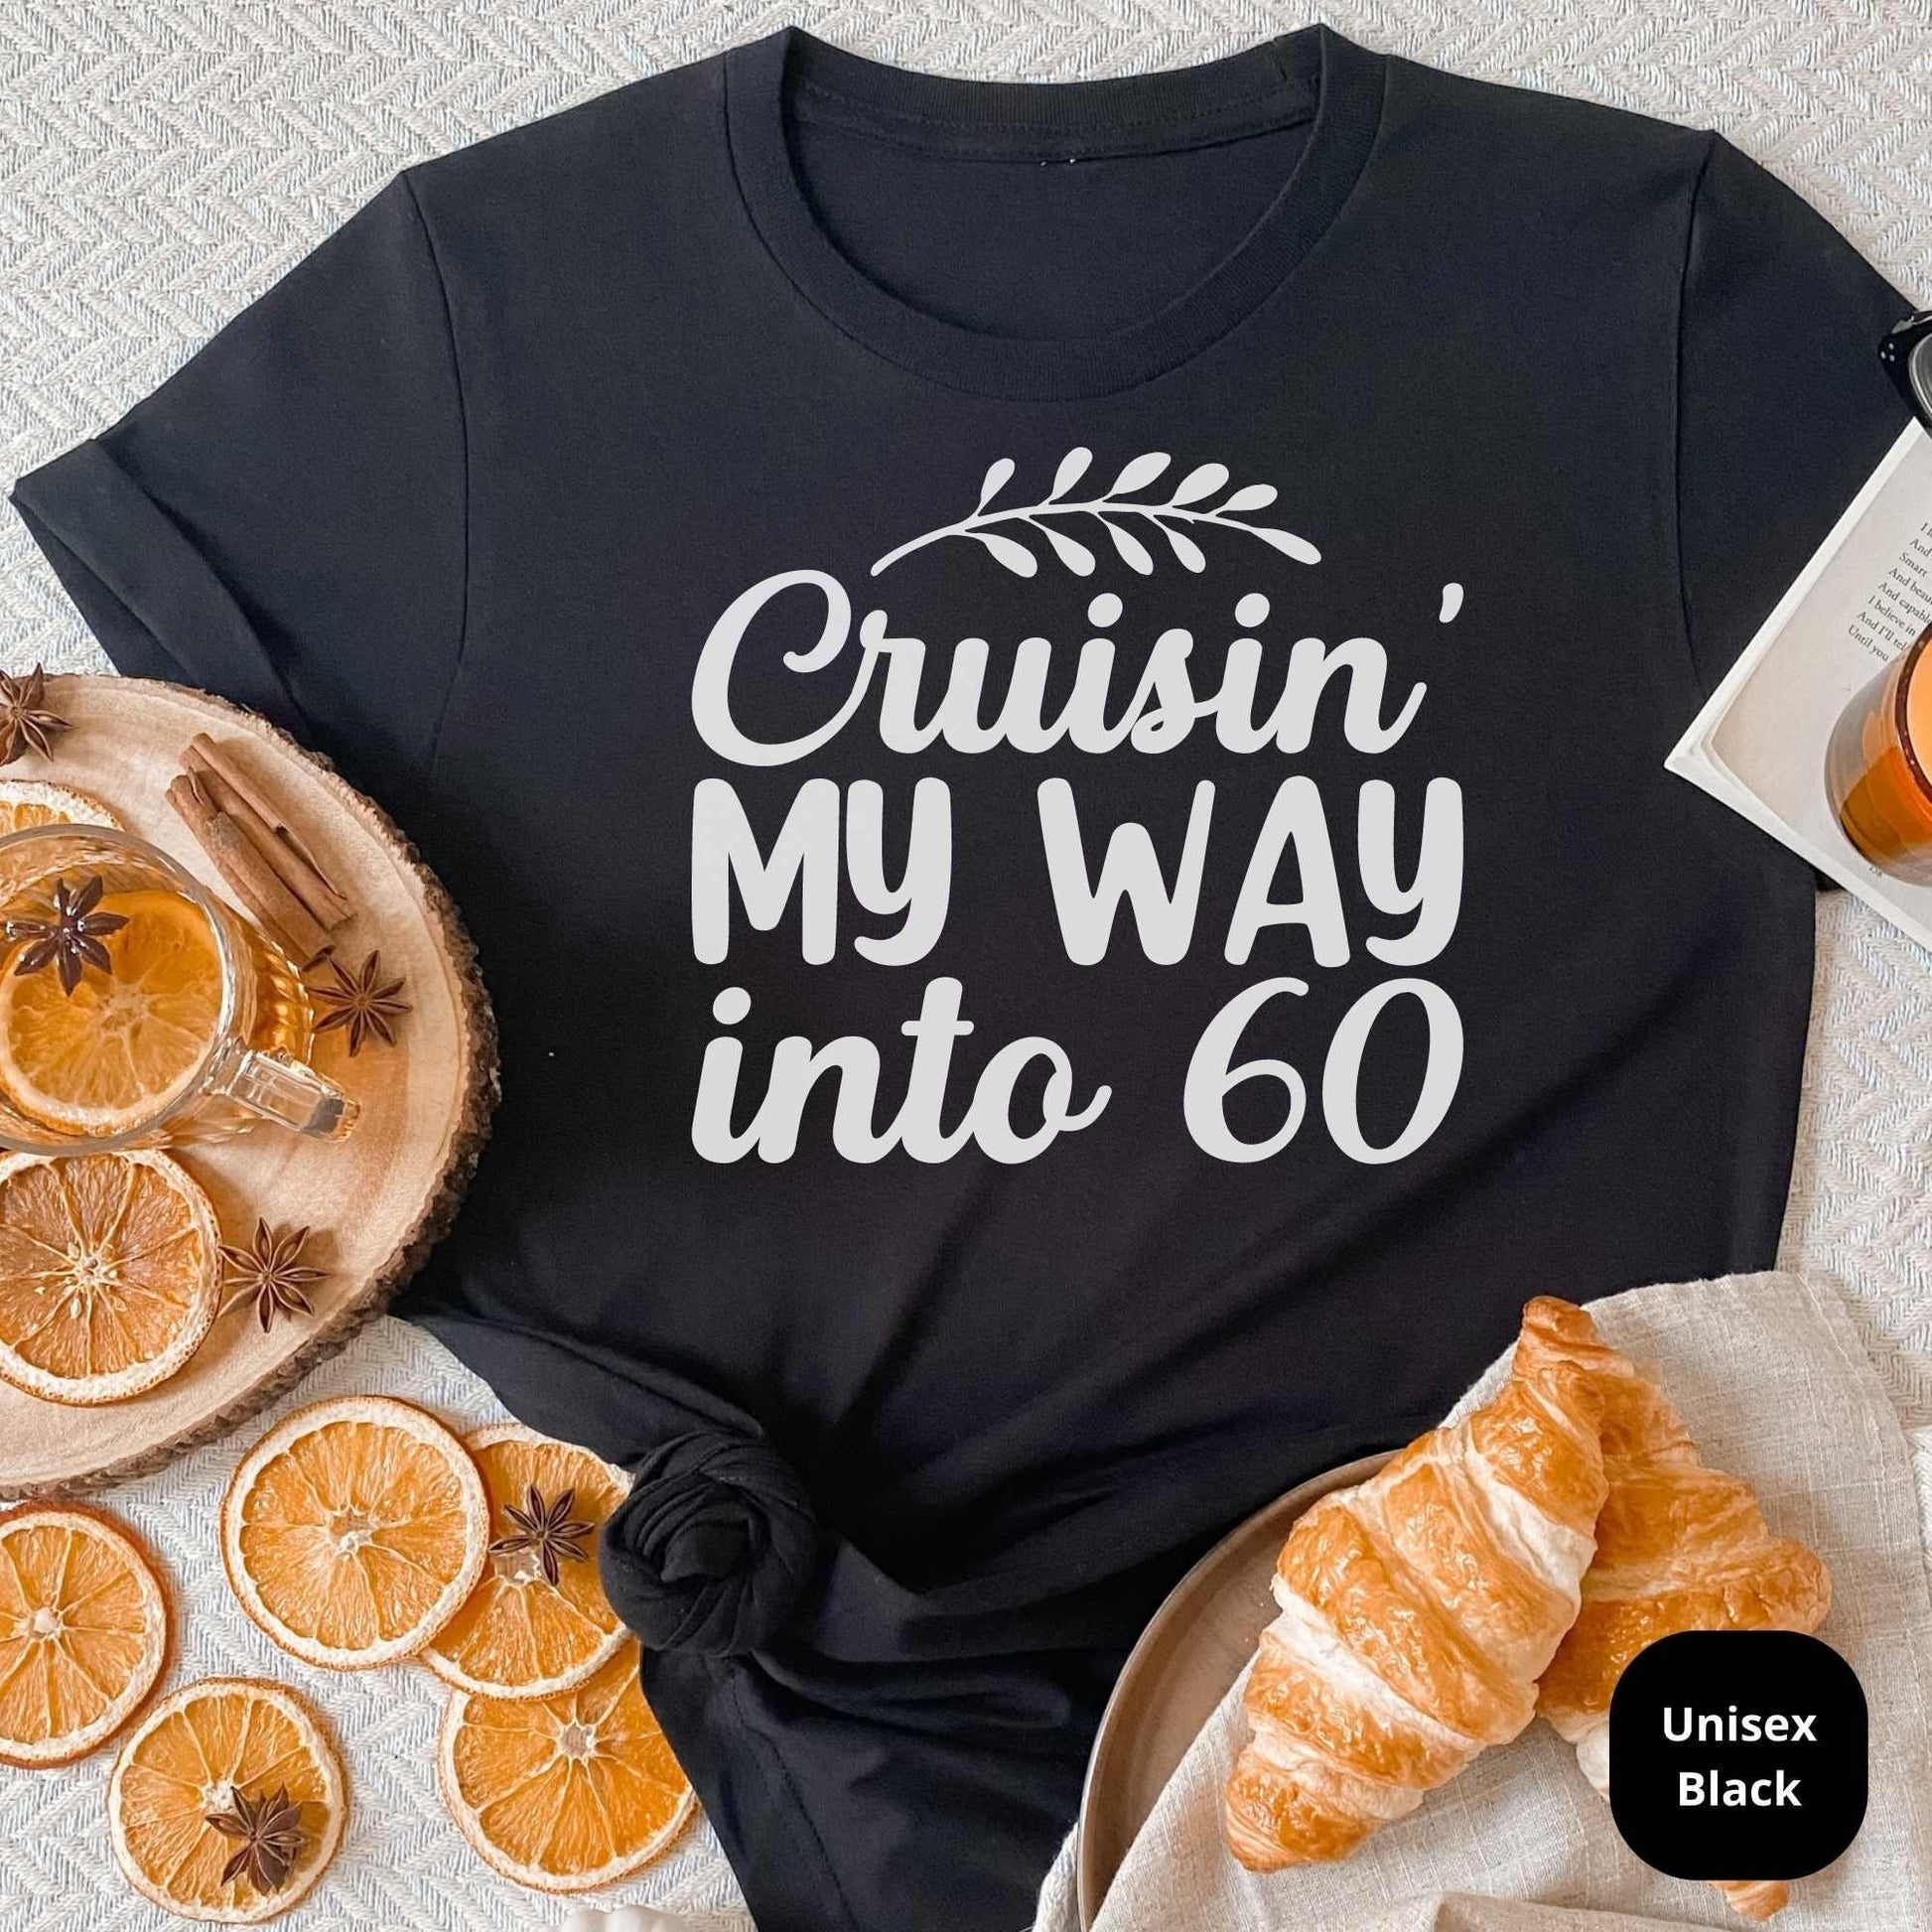 60th Birthday Cruise Shirt, 60th Birthday Gift, Great for Grands, Parents, Aunt, Cousins & Loved Ones Bday Party or Anniversary Celebration HMDesignStudioUS